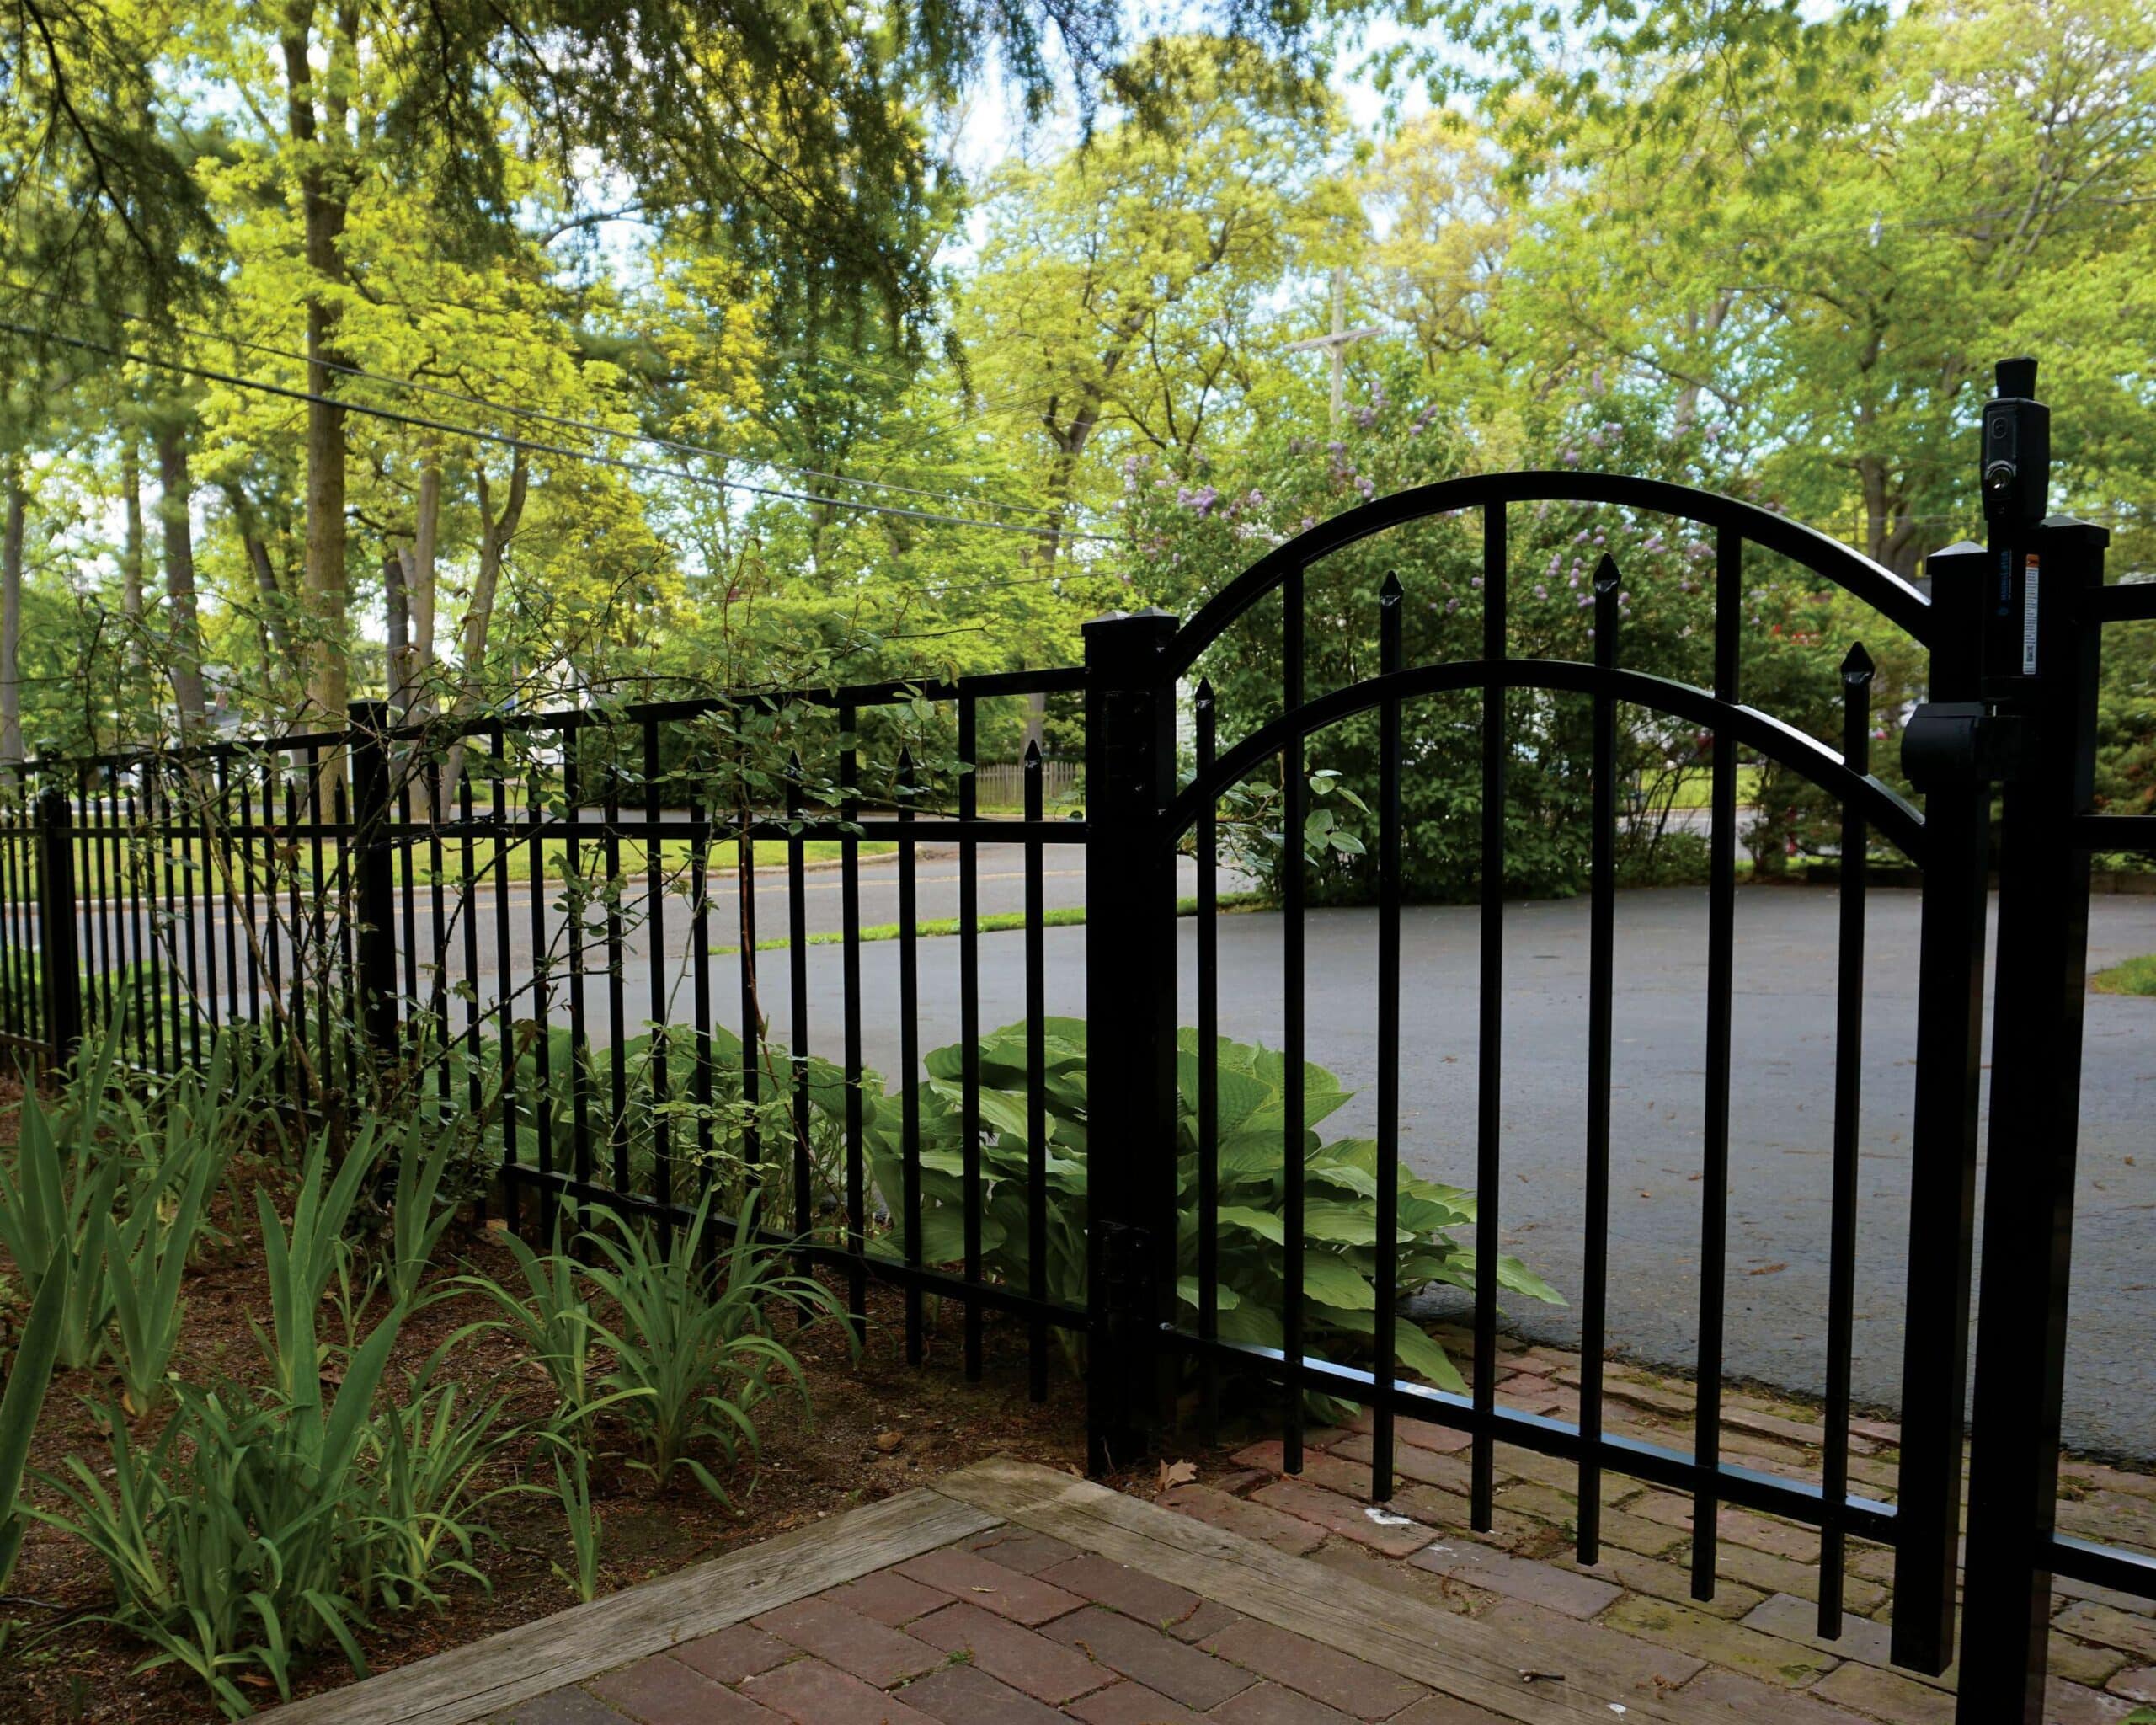 A gated entrance to a driveway, with the driveway just behind an Active Yards Amethyst aluminum fence with Arched Gate